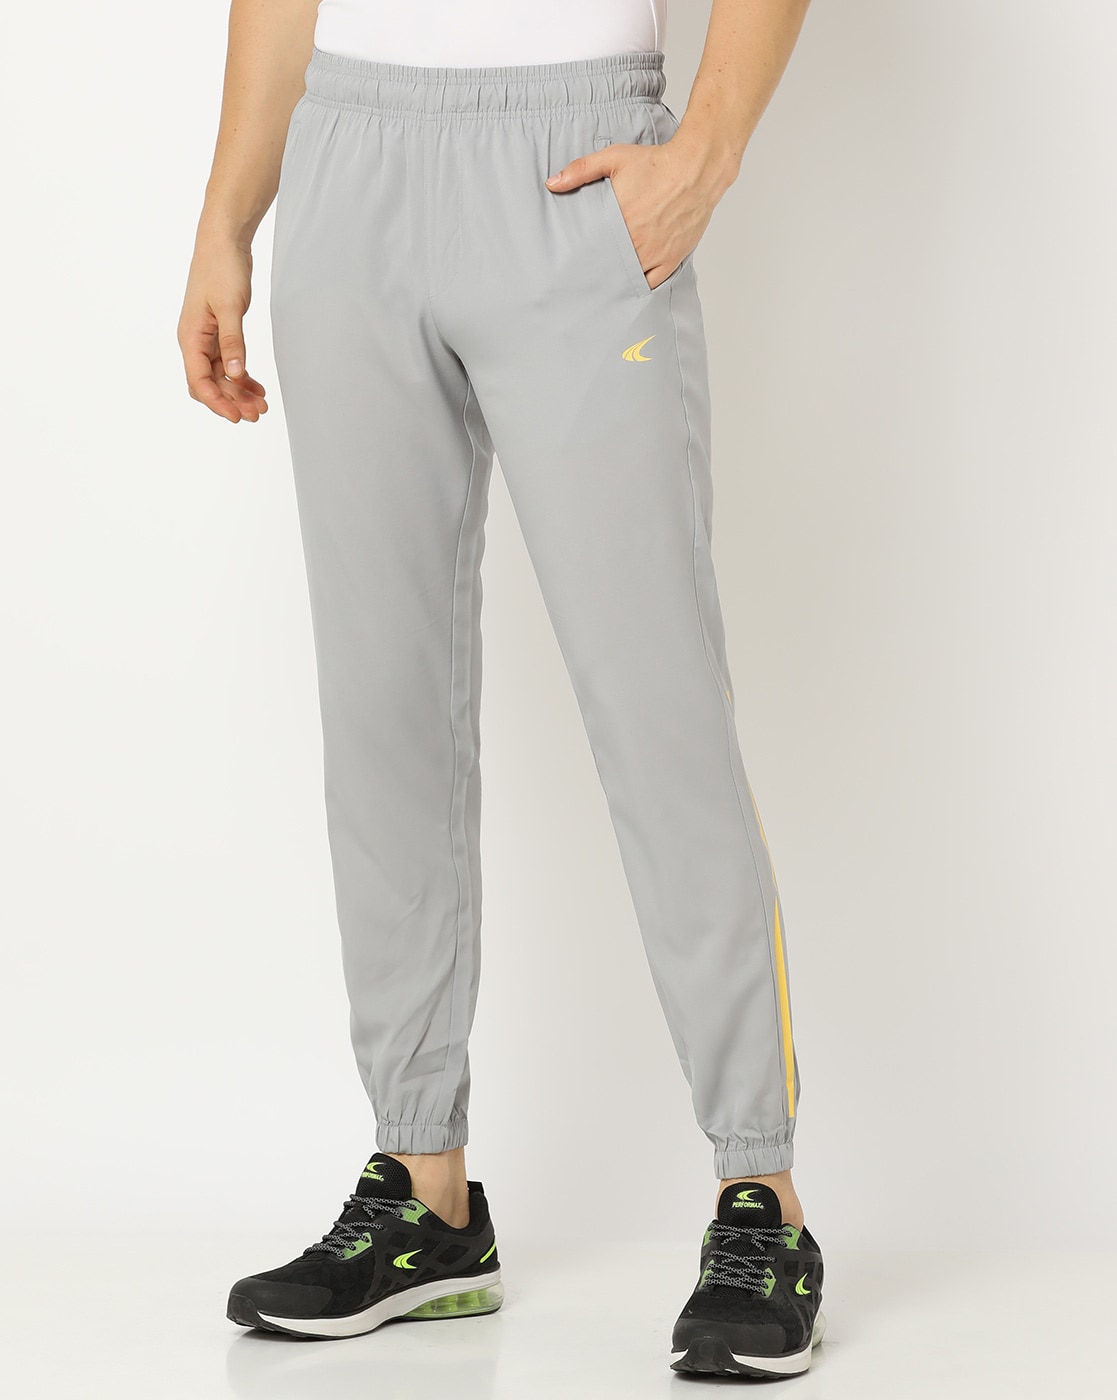 LL Mens Breathable Lace Up Performax Track Pants For Running And Training  Loose Fit, Elastic, And Comfortable For Leisure And Fitness Activities From  Bright2023, $21.69 | DHgate.Com